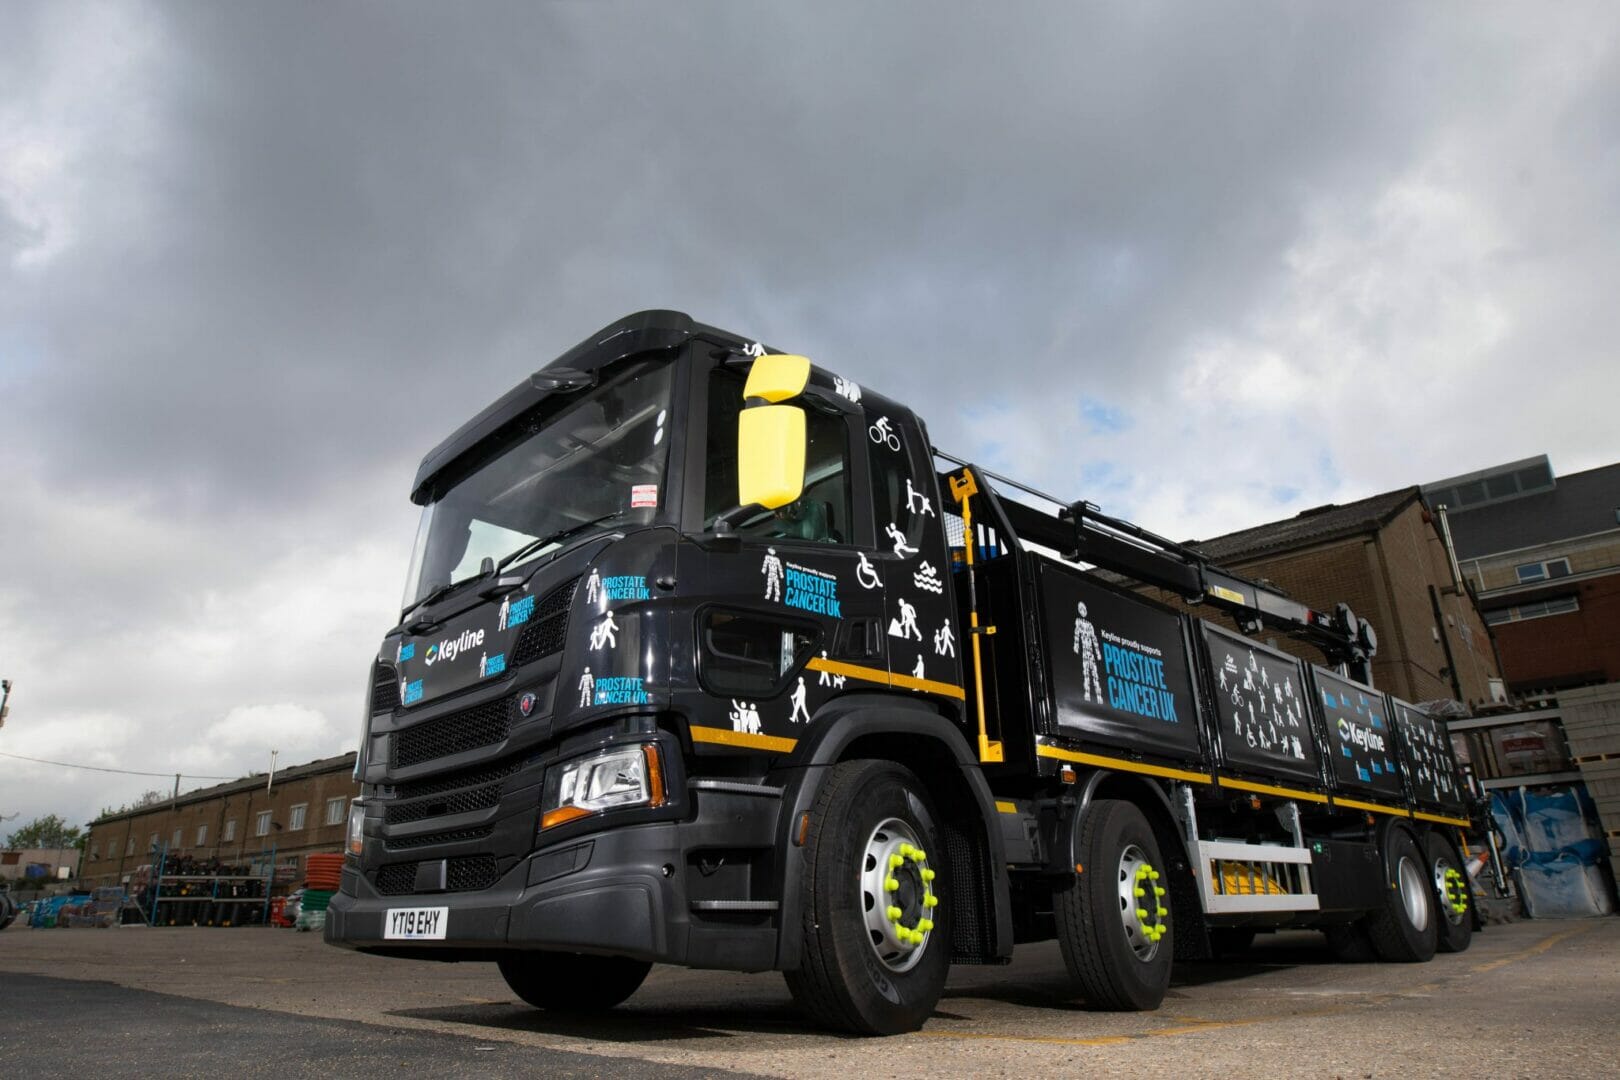 KEYLINE CIVILS UNVEIL EYE-CATCHING BRANDED TRUCK TO DRIVE HOME HEALTH MESSAGE FOR PROSTATE CANCER UK